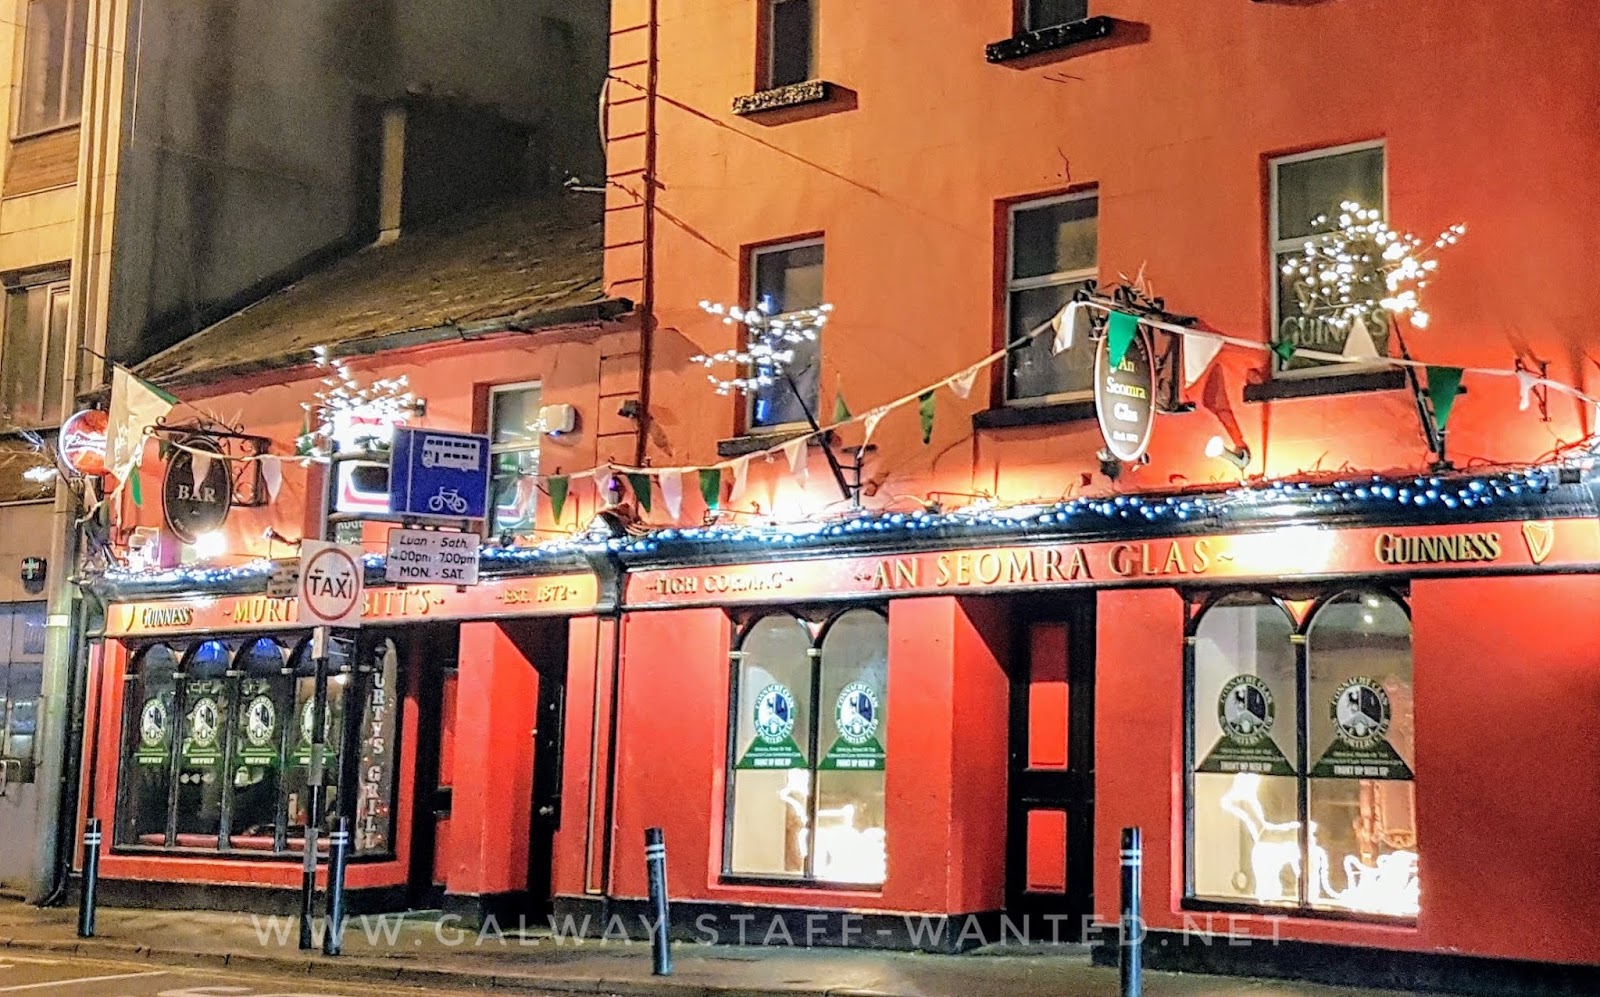 Bright red pub, extending over two or more buildings in central Galway city:   Tigh Cormac - An Seomra Glas ie The Green Room